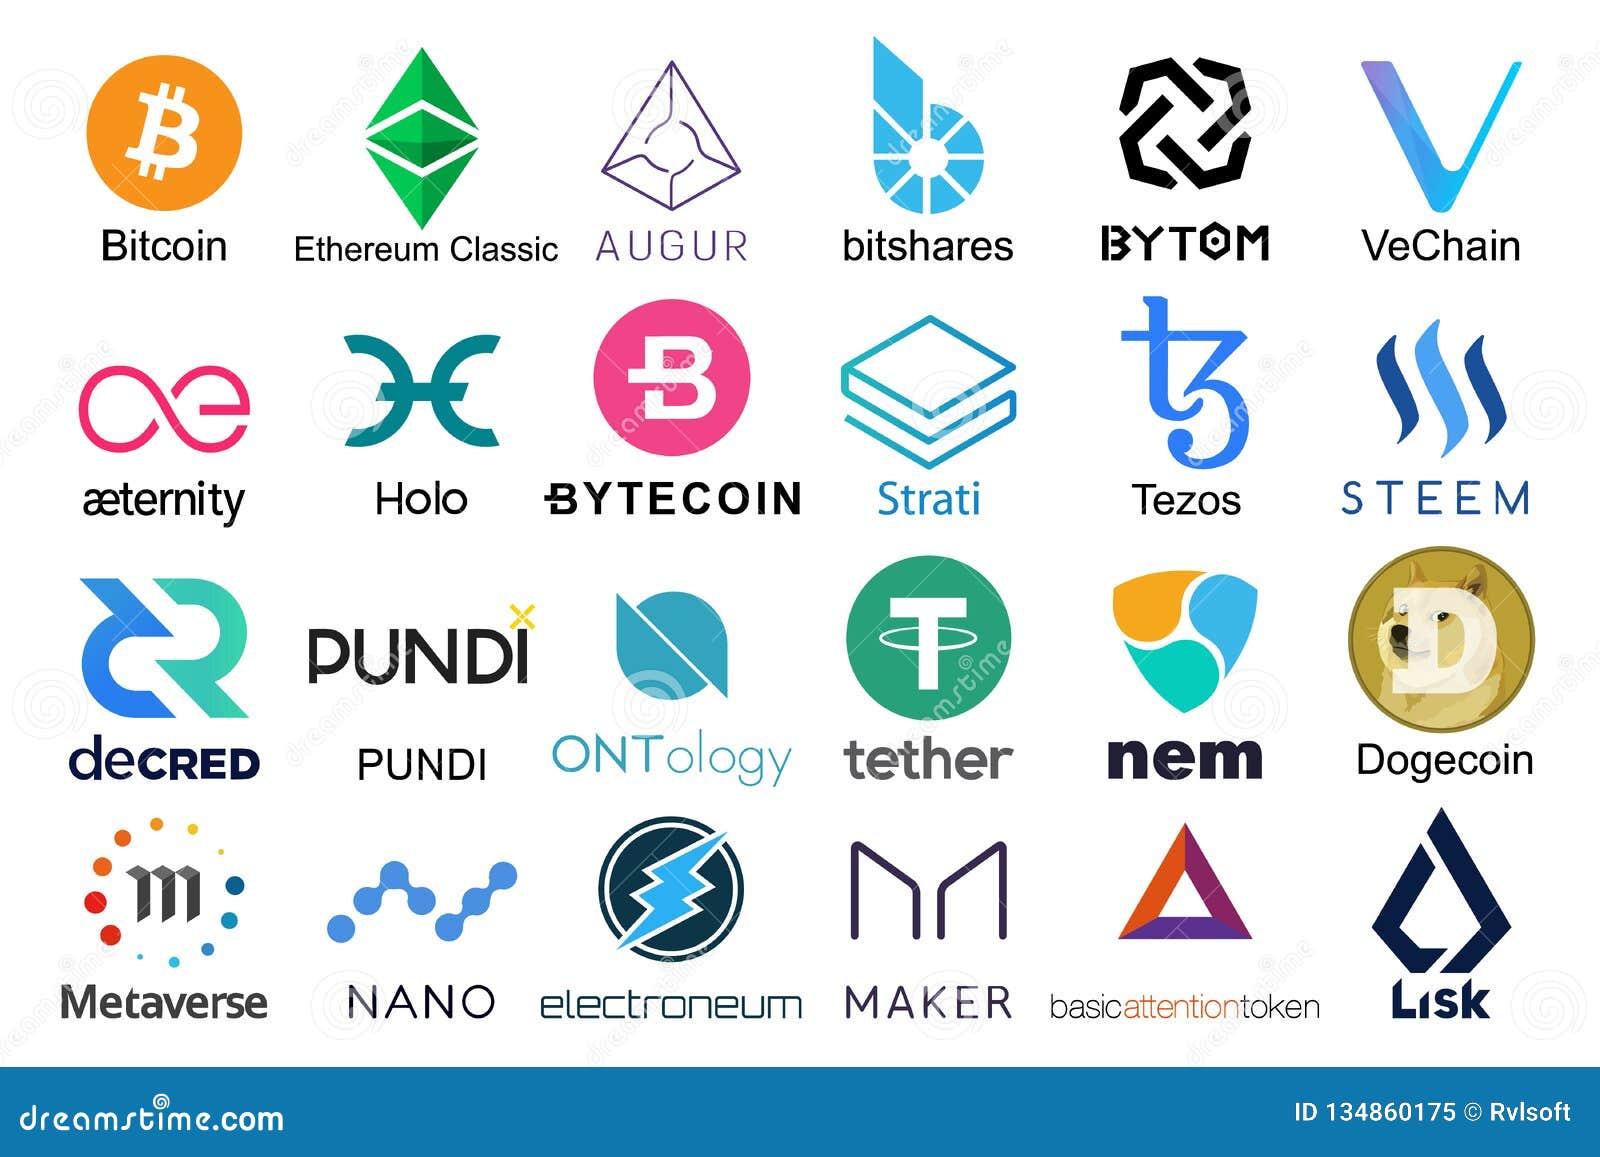 names of cryptocurrencies